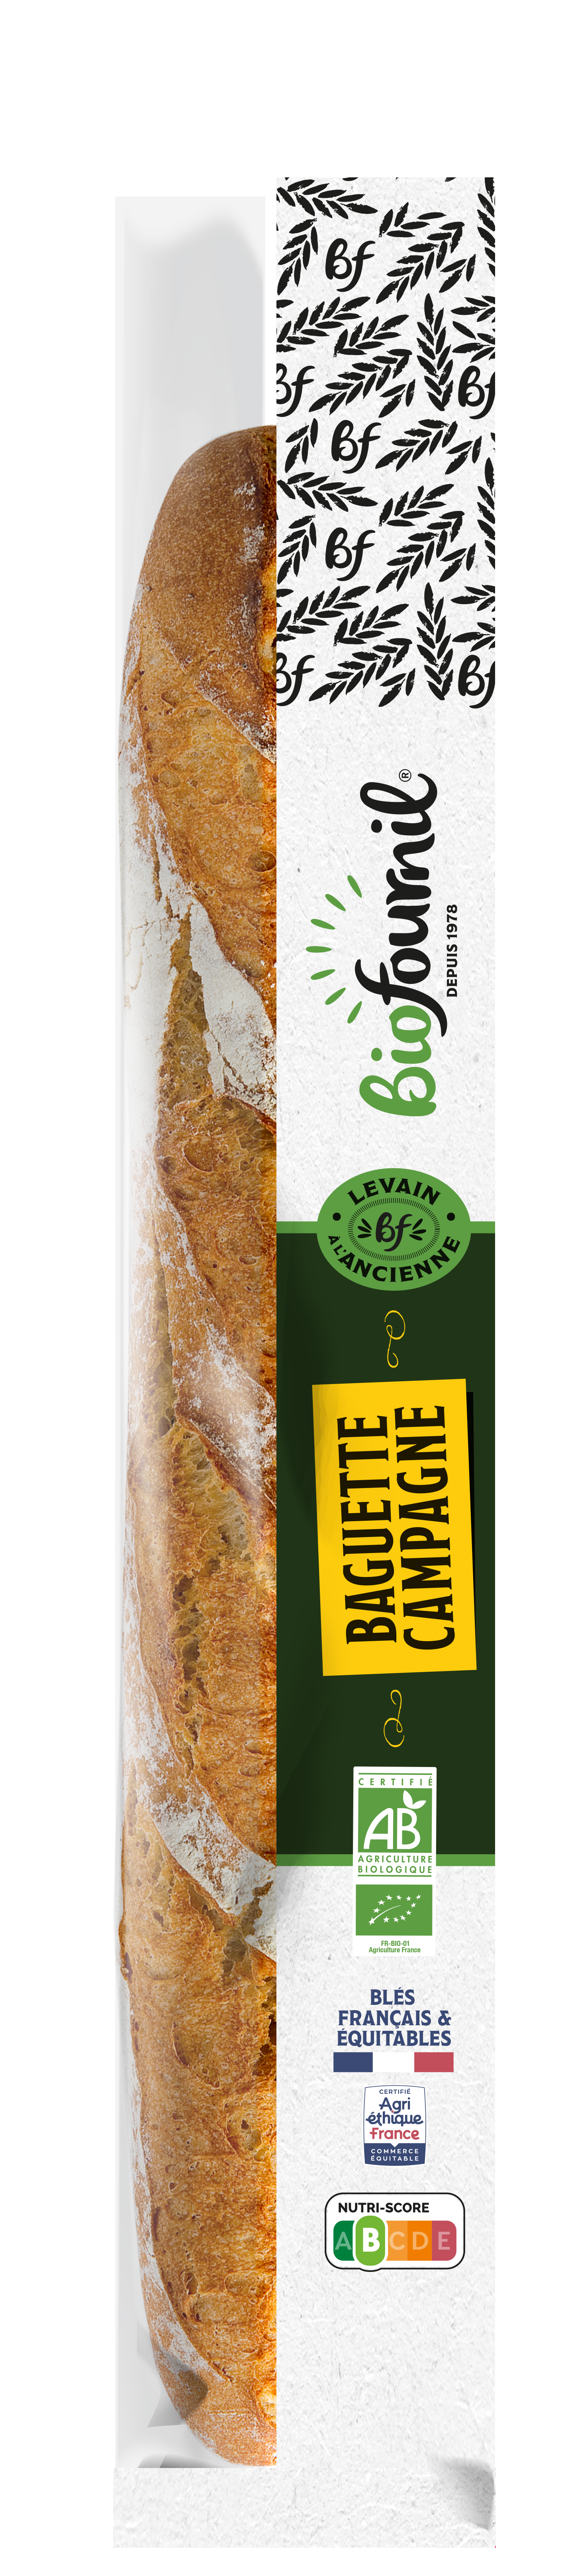 PACK_BAGUETTE CAMPAGNE